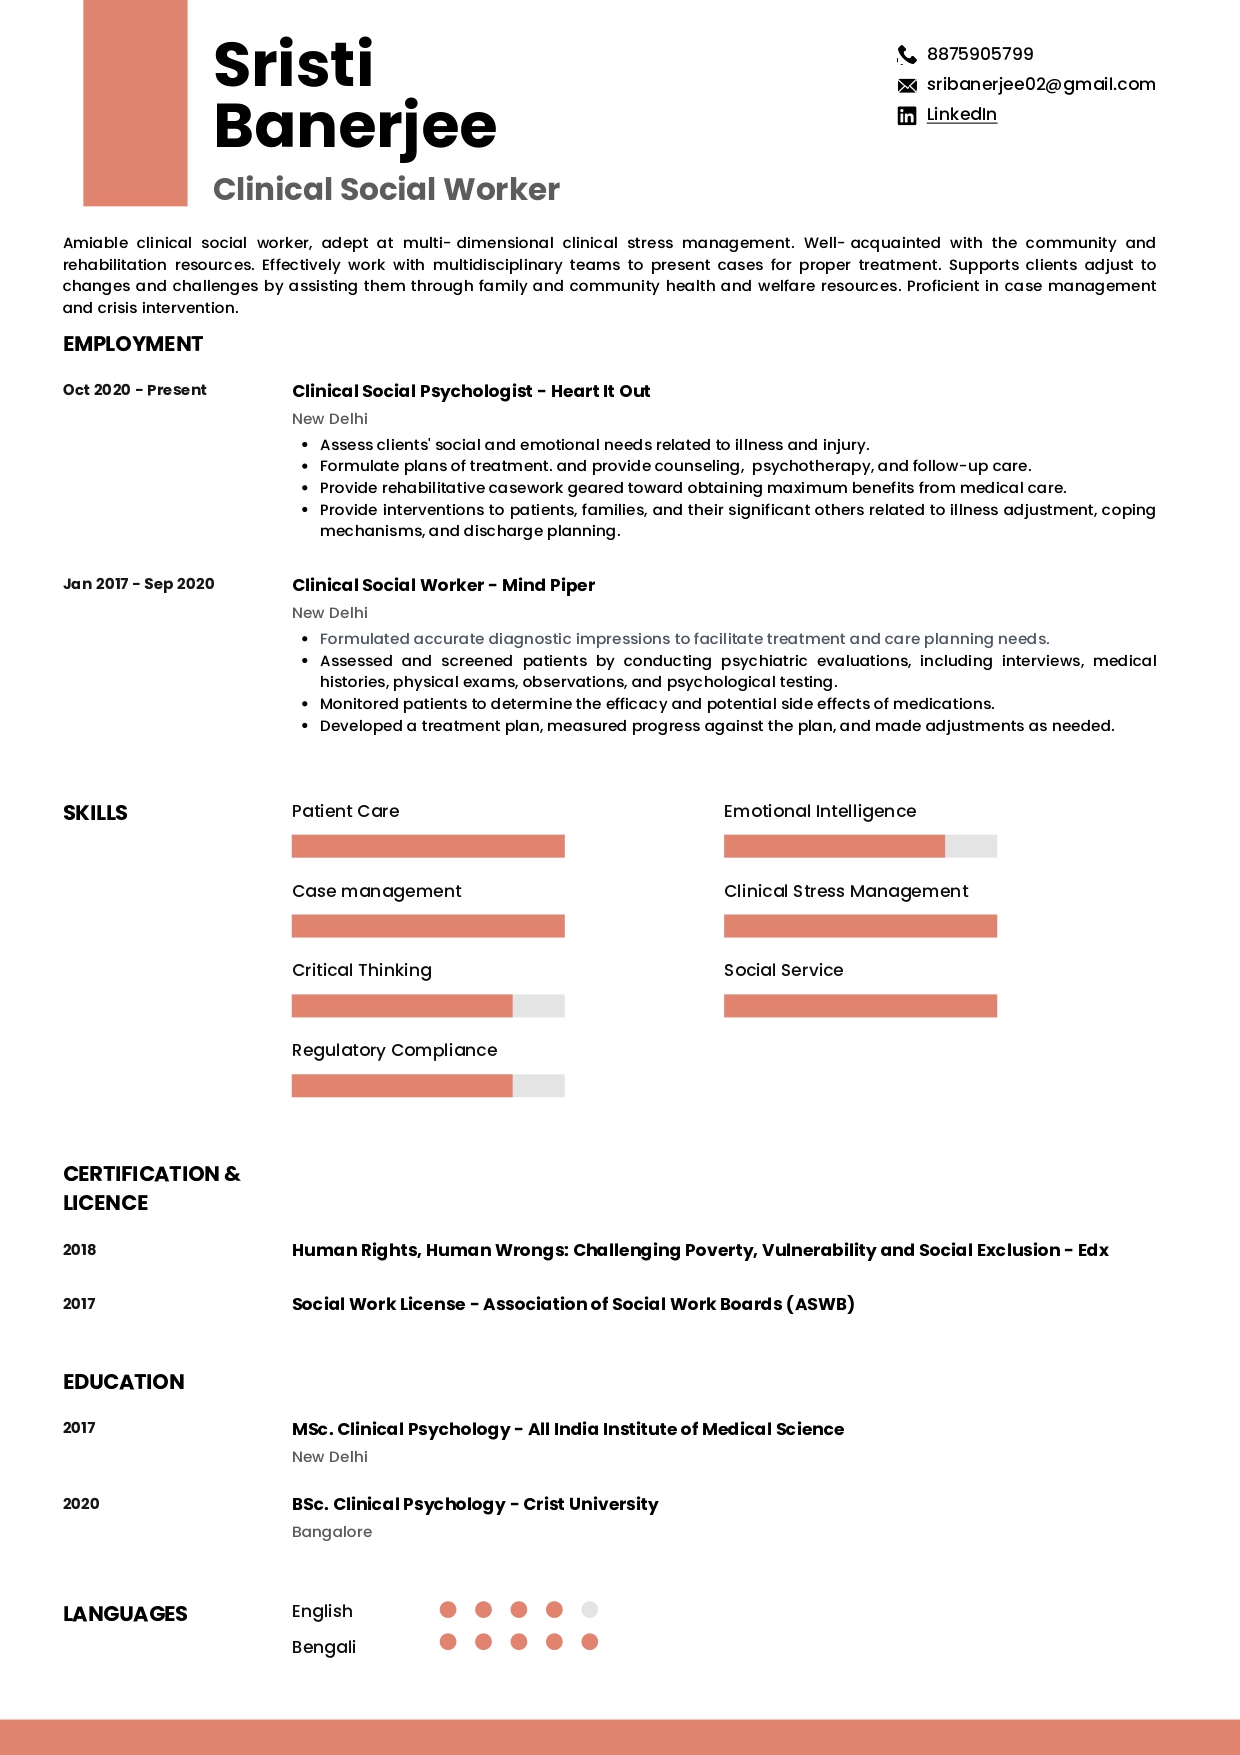 Resume of Clinical Social Worker